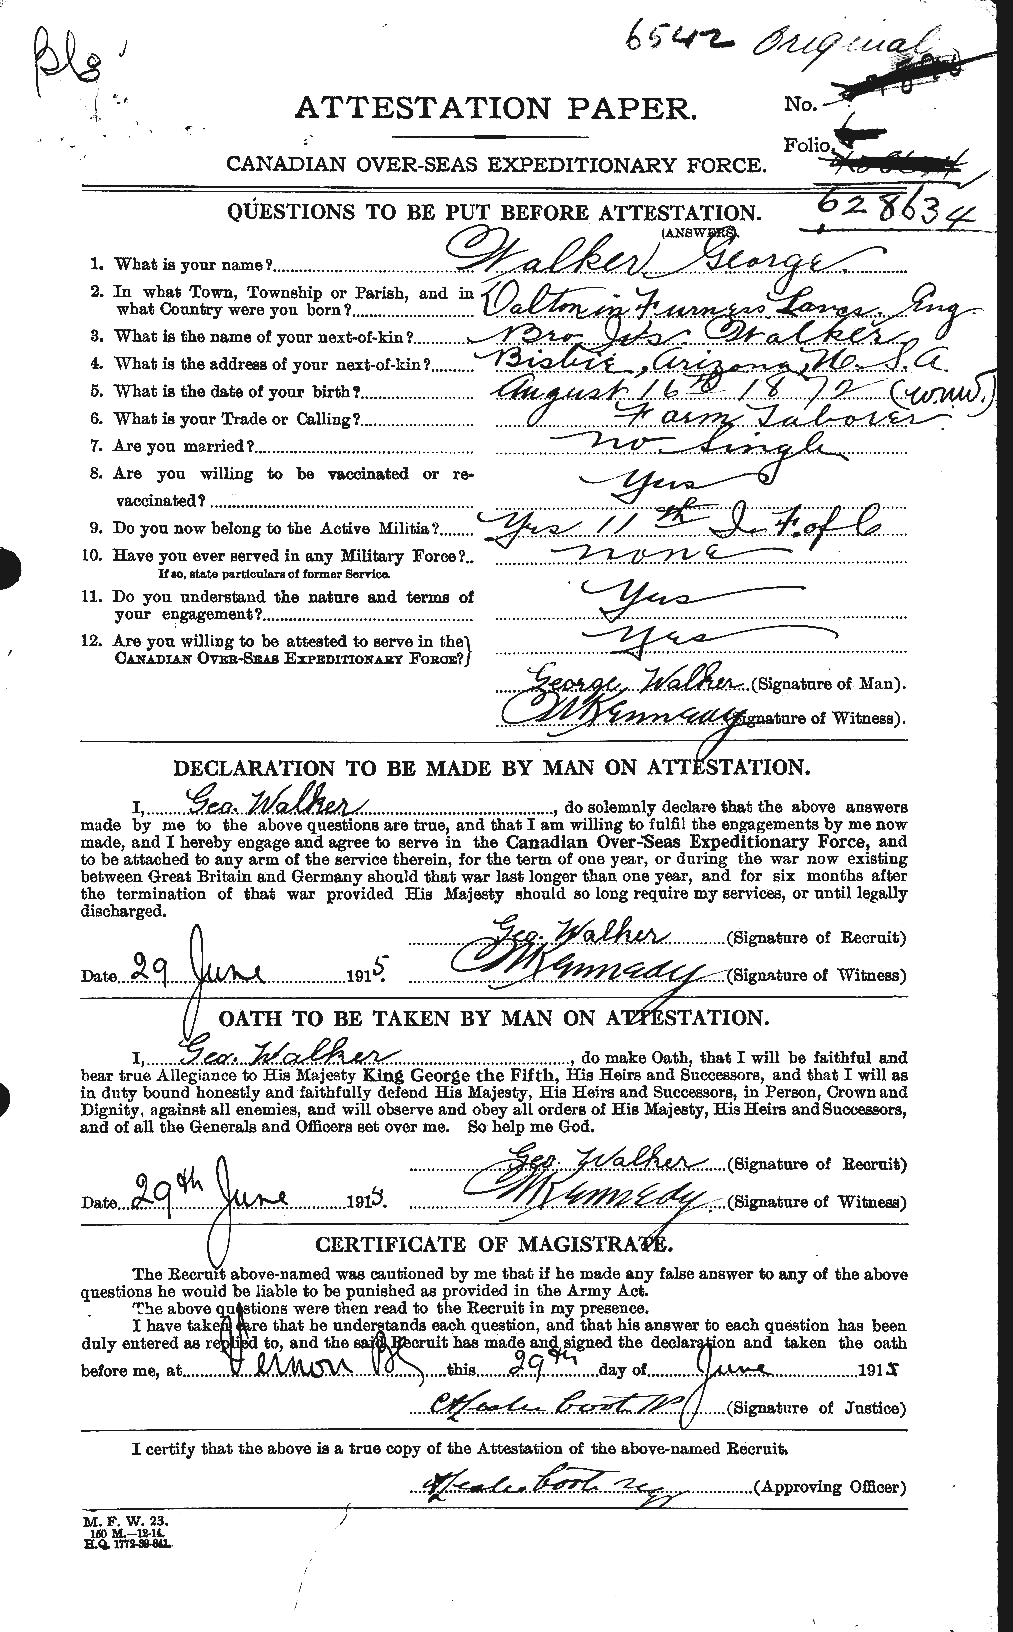 Personnel Records of the First World War - CEF 651922a